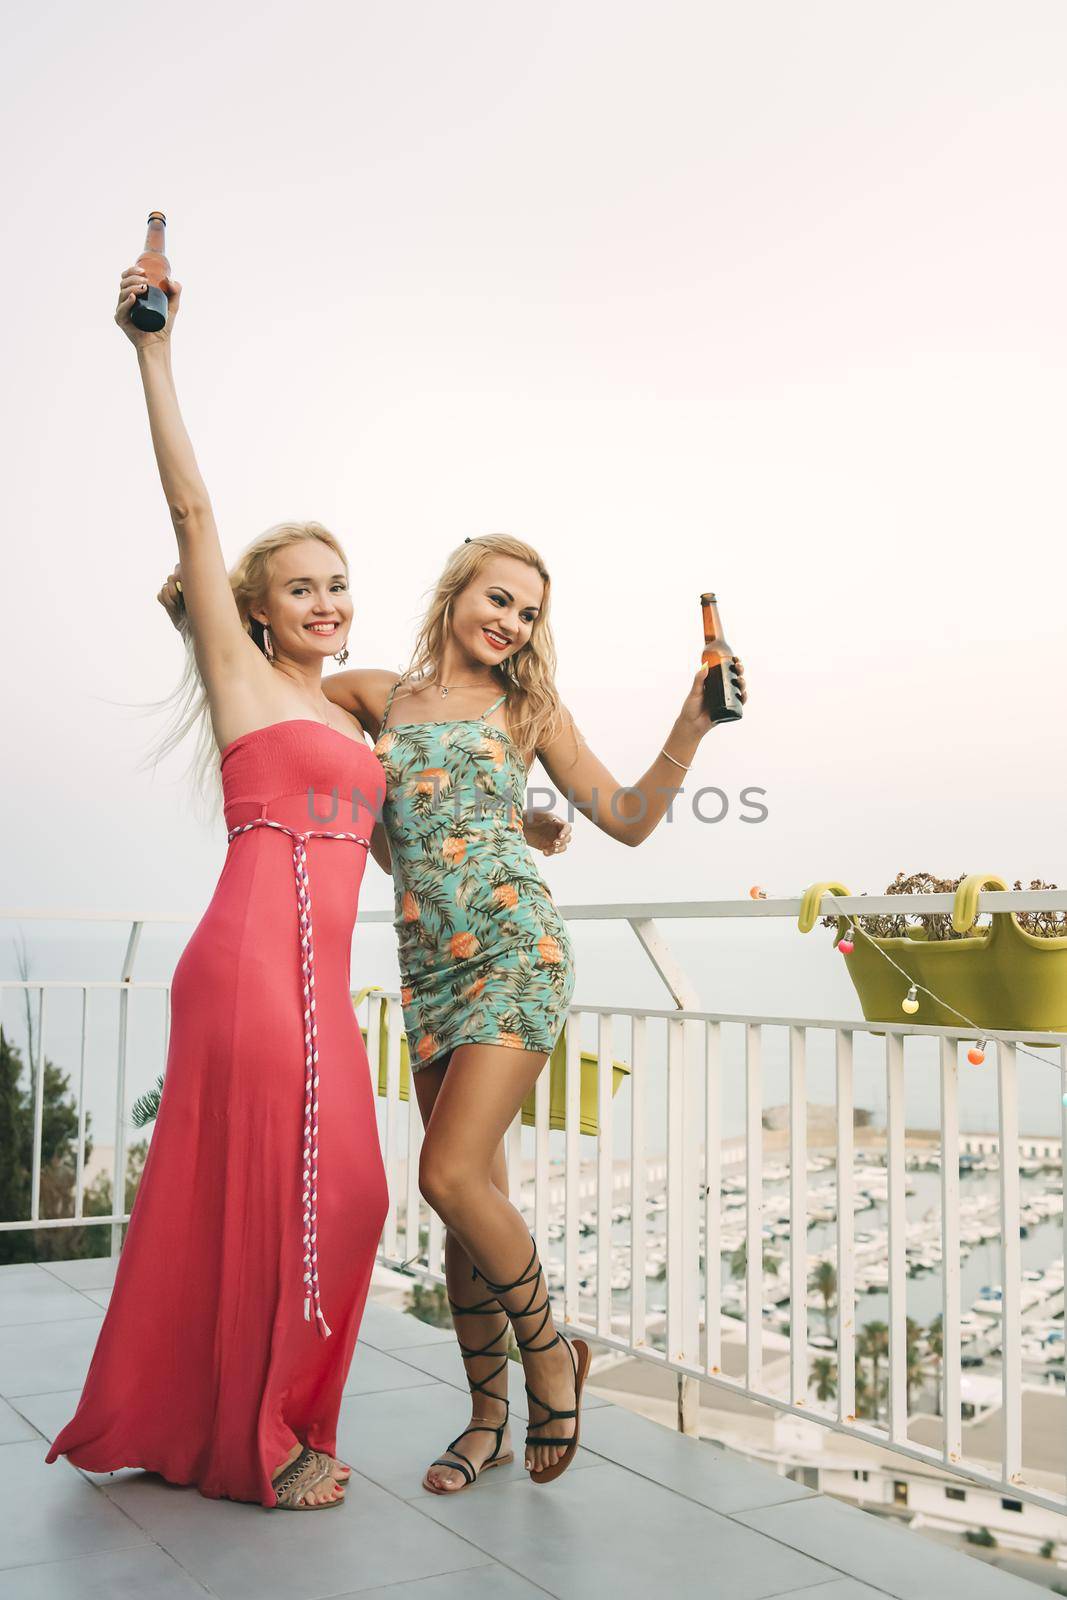 girls dancing at a private party on the terrace by raulmelldo